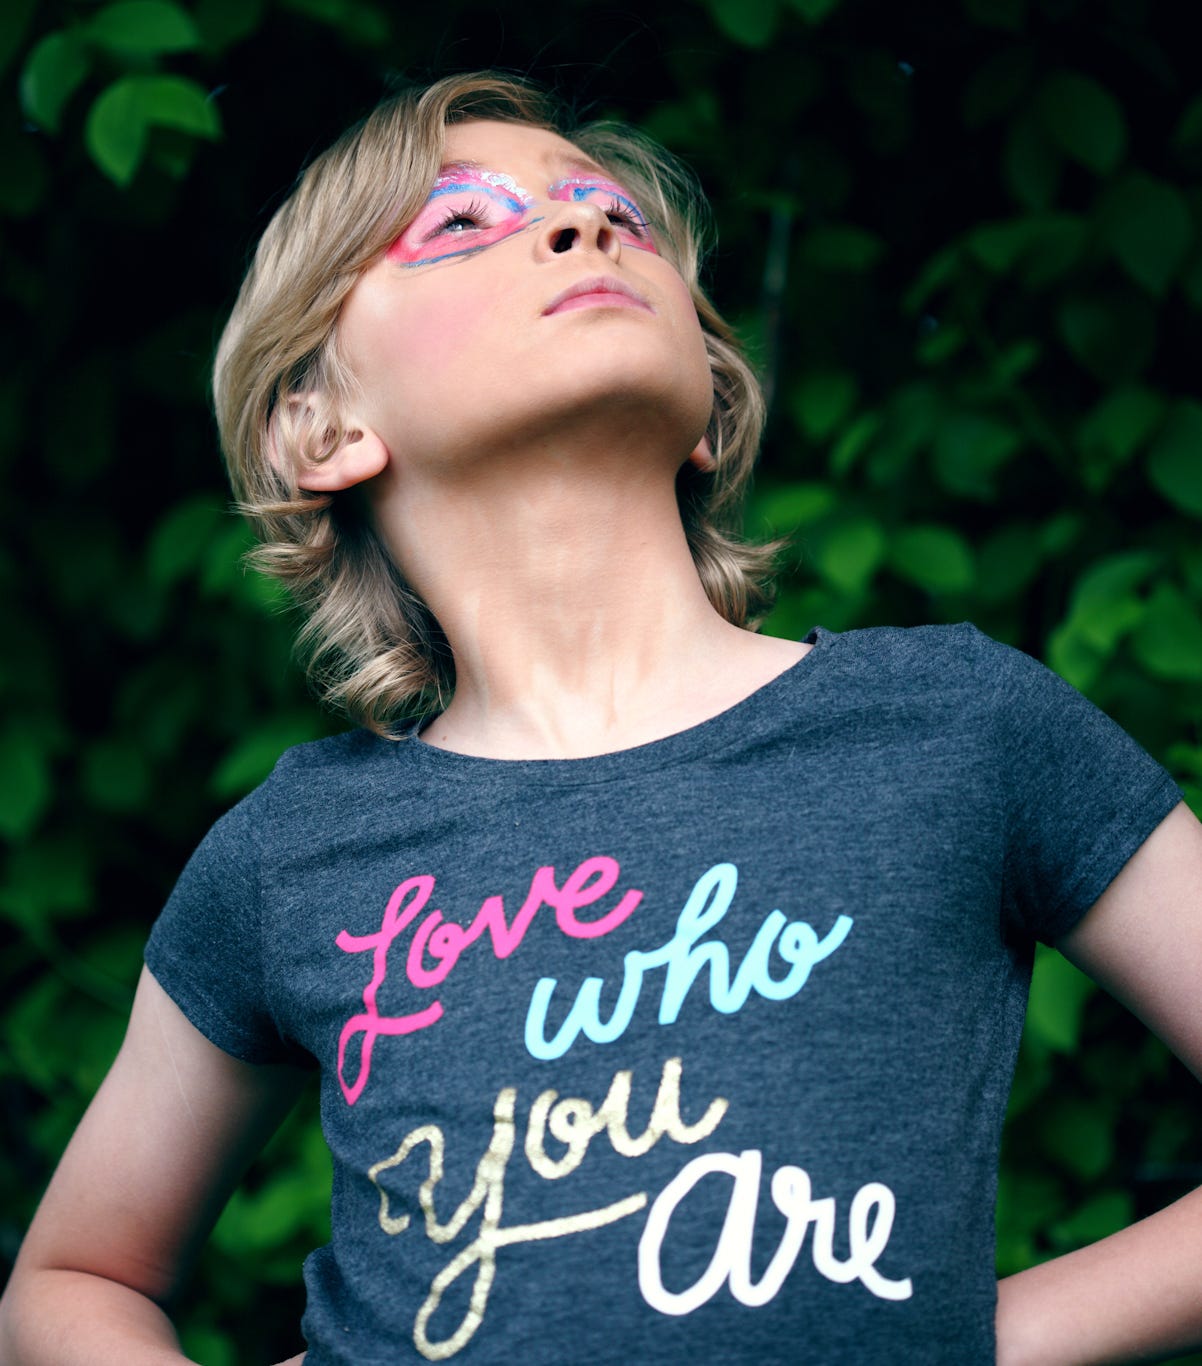 Young woman with colors of the trans flag in eye makeup and wearing a shirt that says “Love who you love”